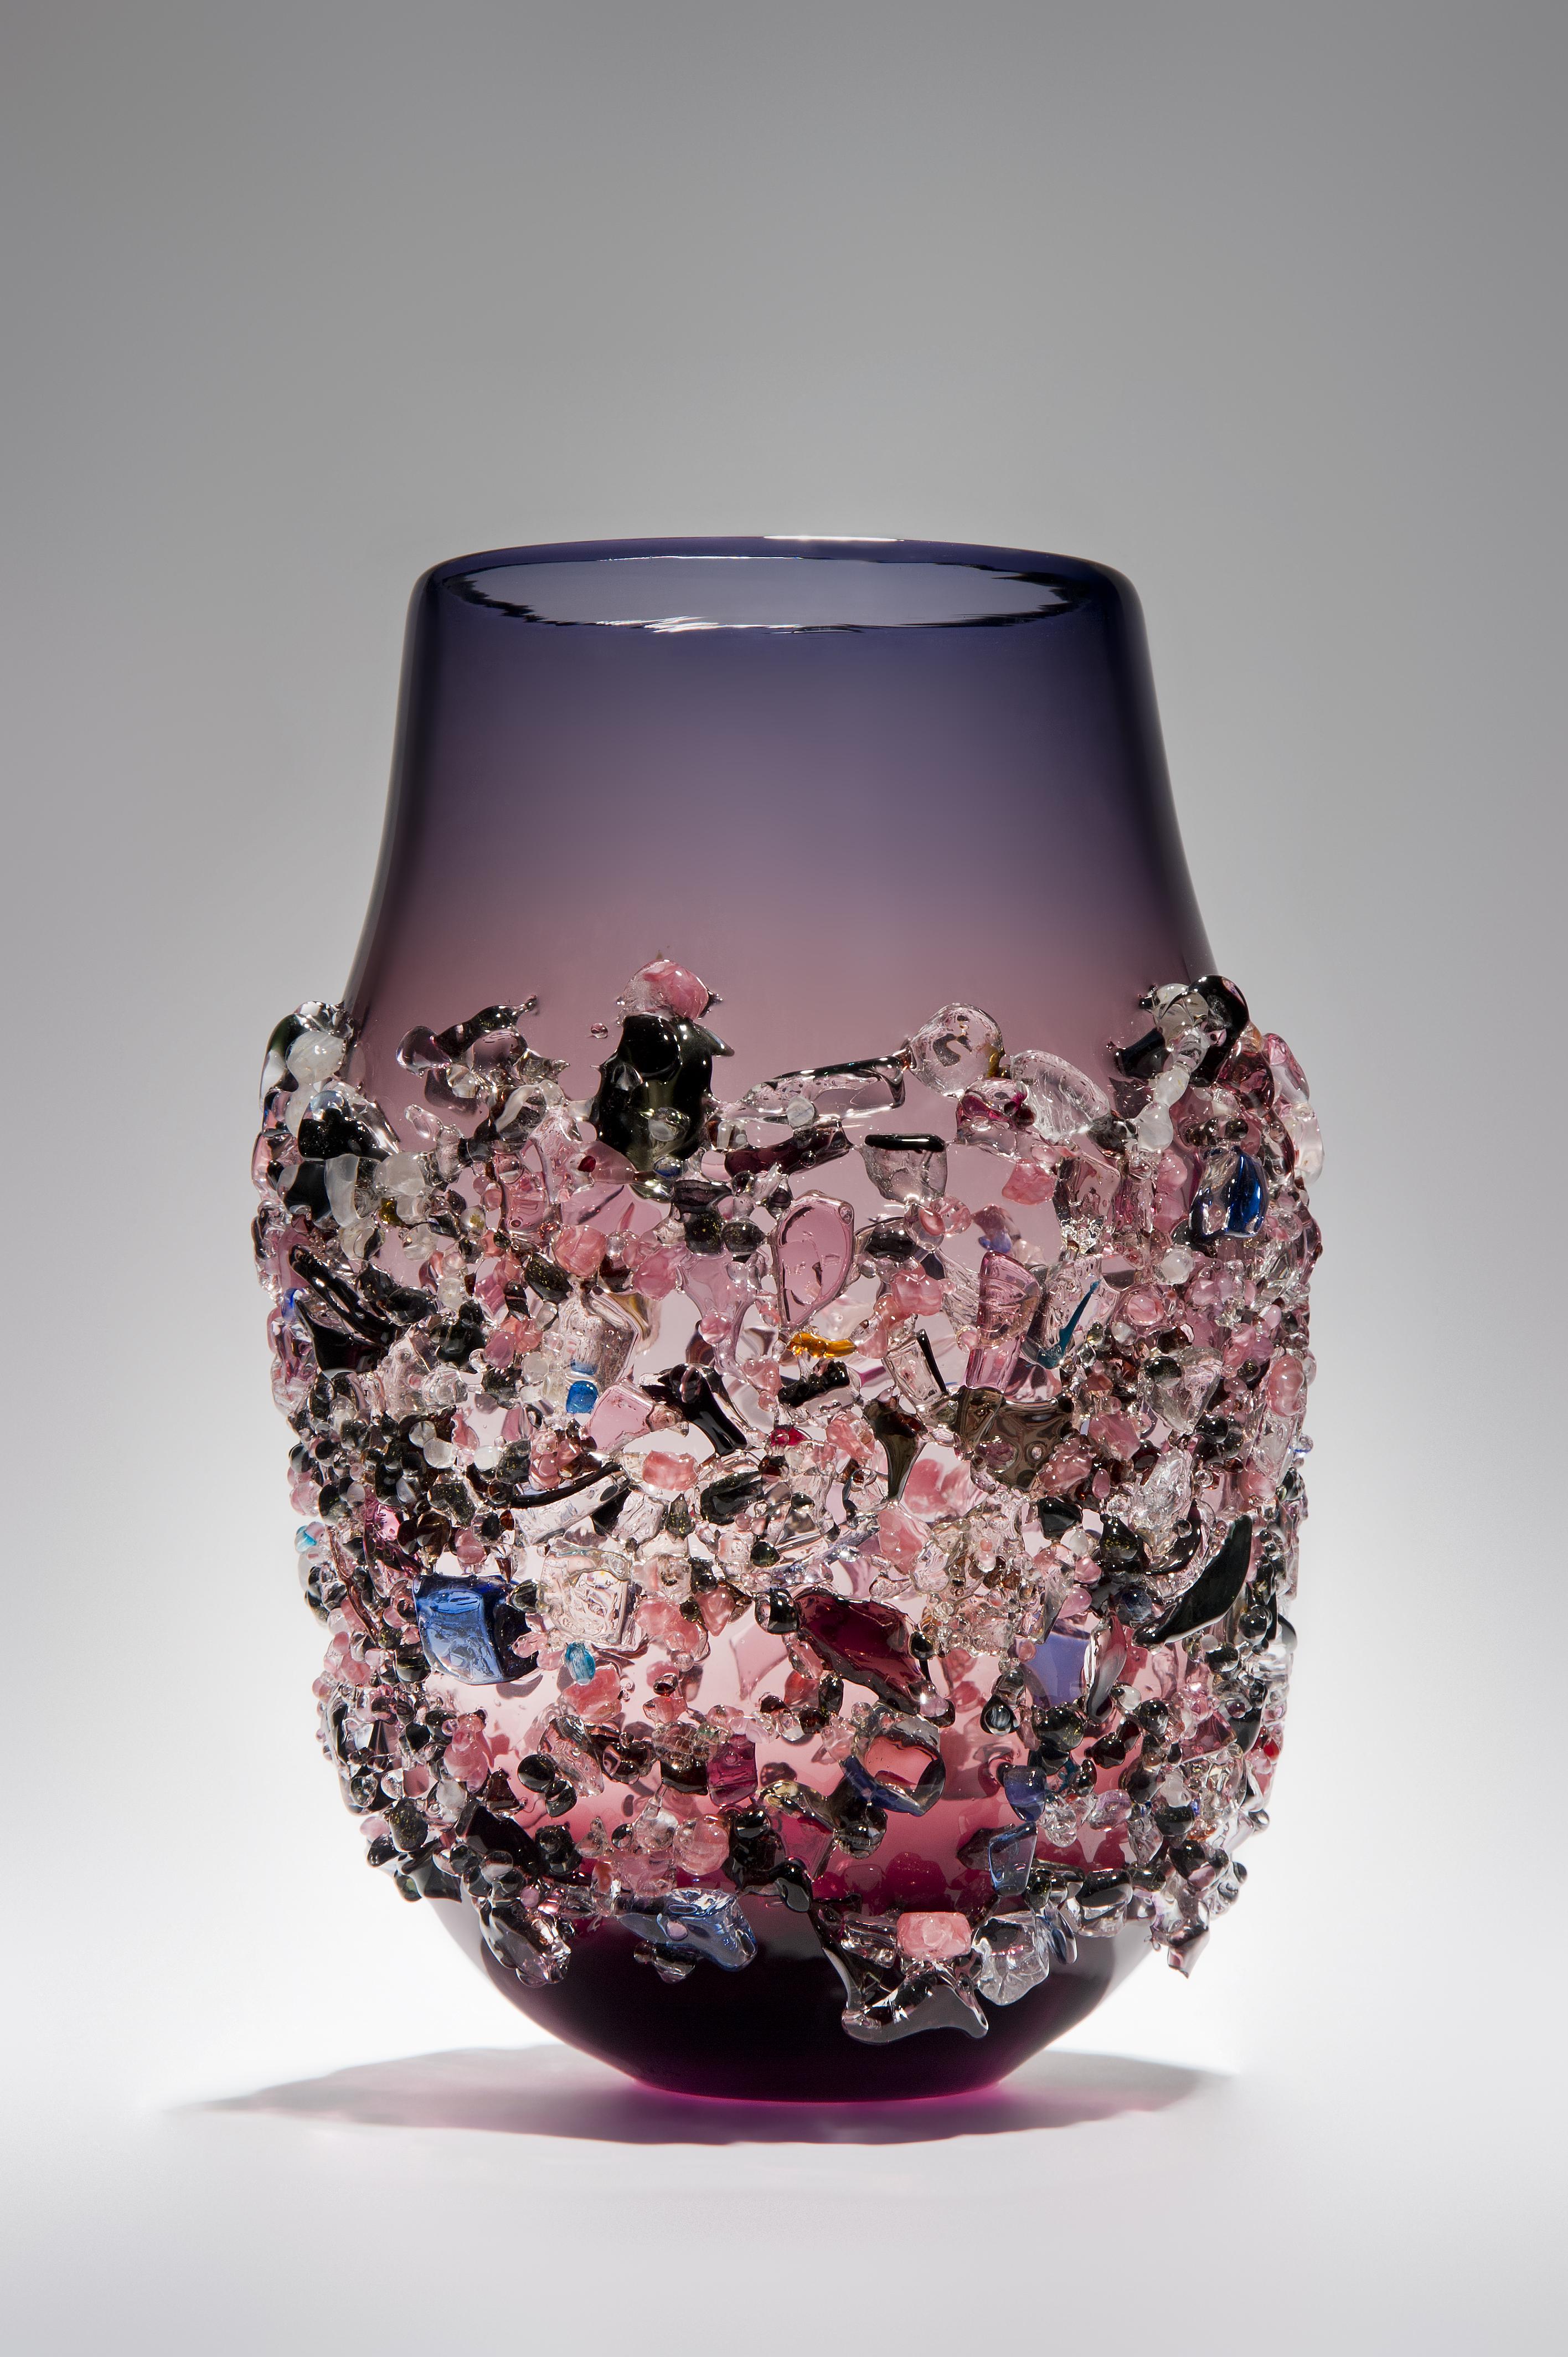 Sakura IV is a unique handblown art glass sculptural vase, covered in an organic glass shard adornment by the Dutch artist Maarten Vrolijk. The piece is flame polished to soften the edges of all the additional external pieces.

Maarten Vrolijk is an